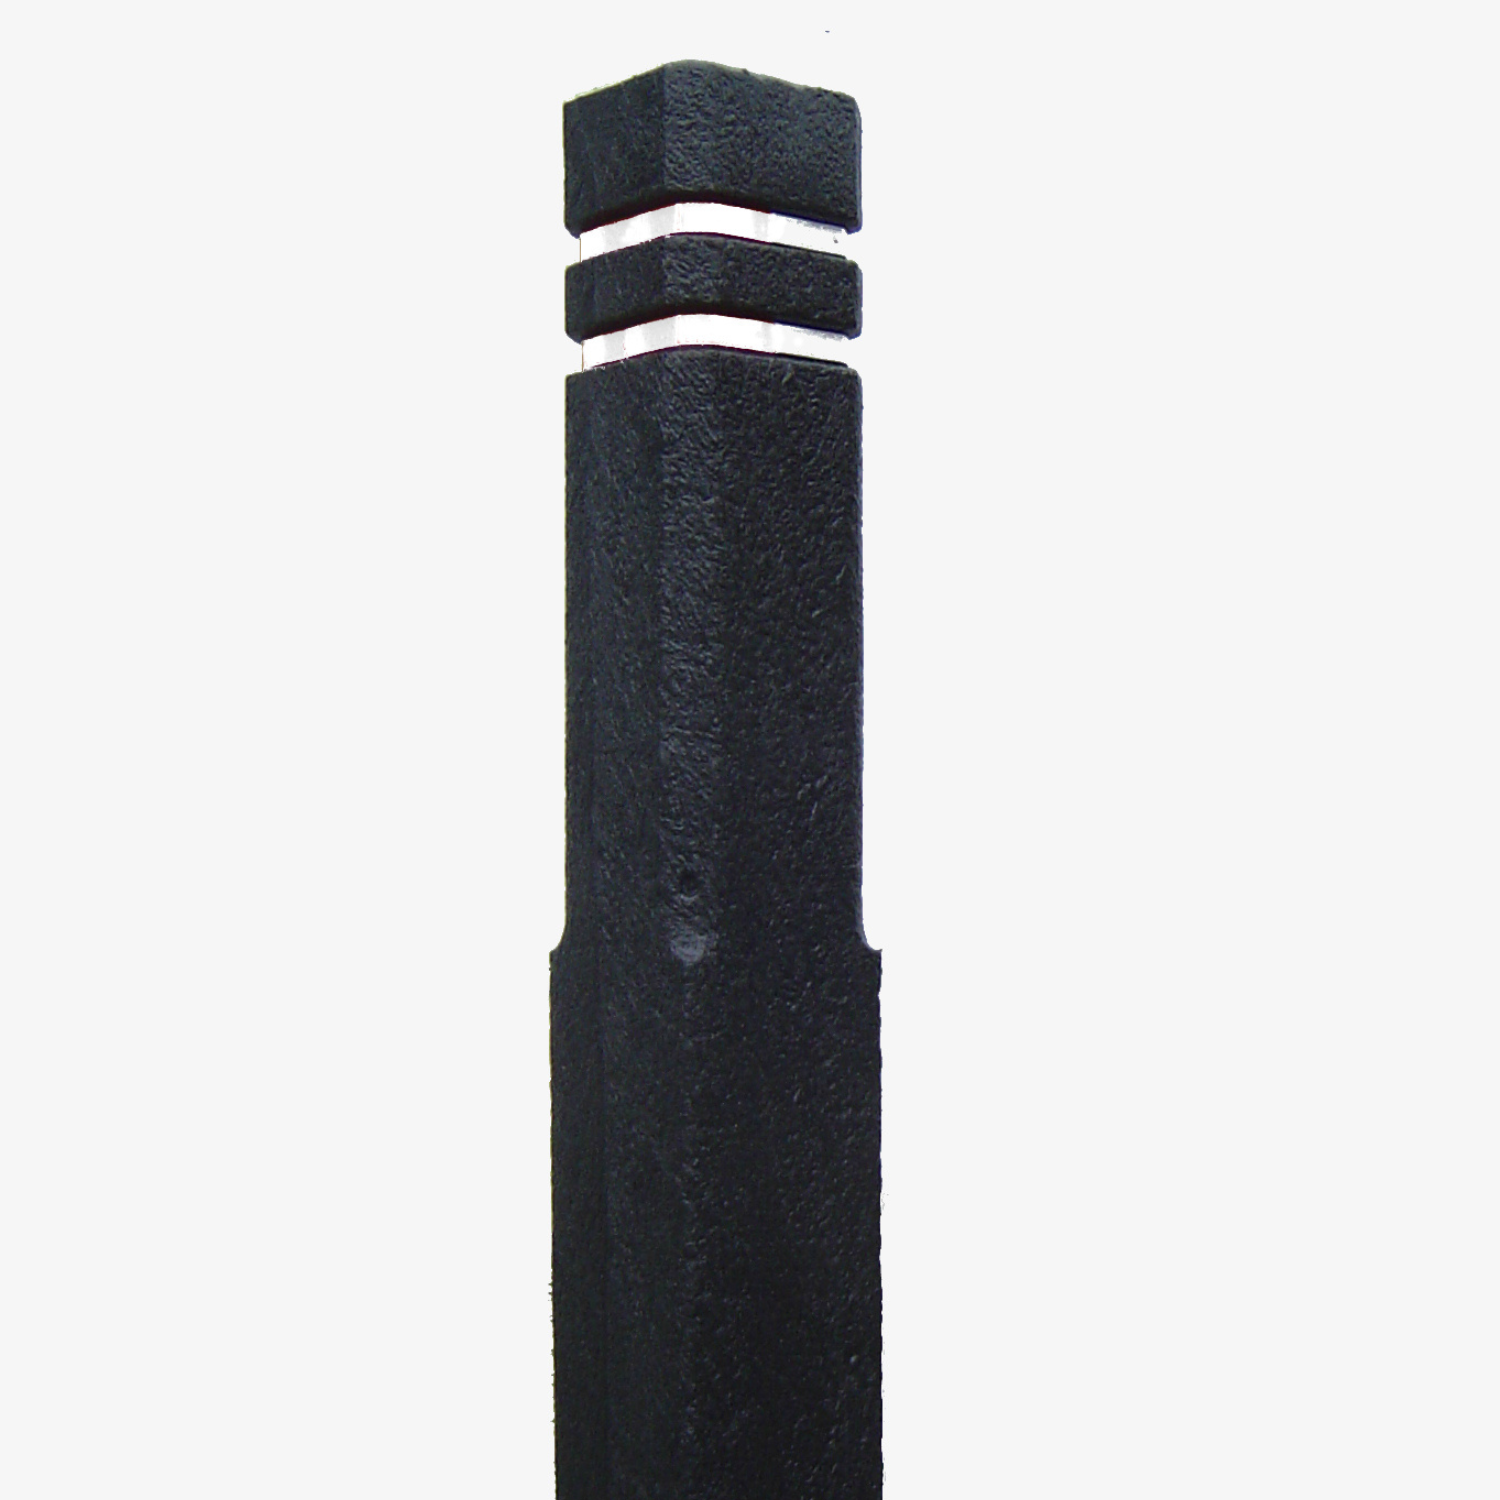 Square White Banded Recycled Plastic Bollard , Manticore Lumber Black